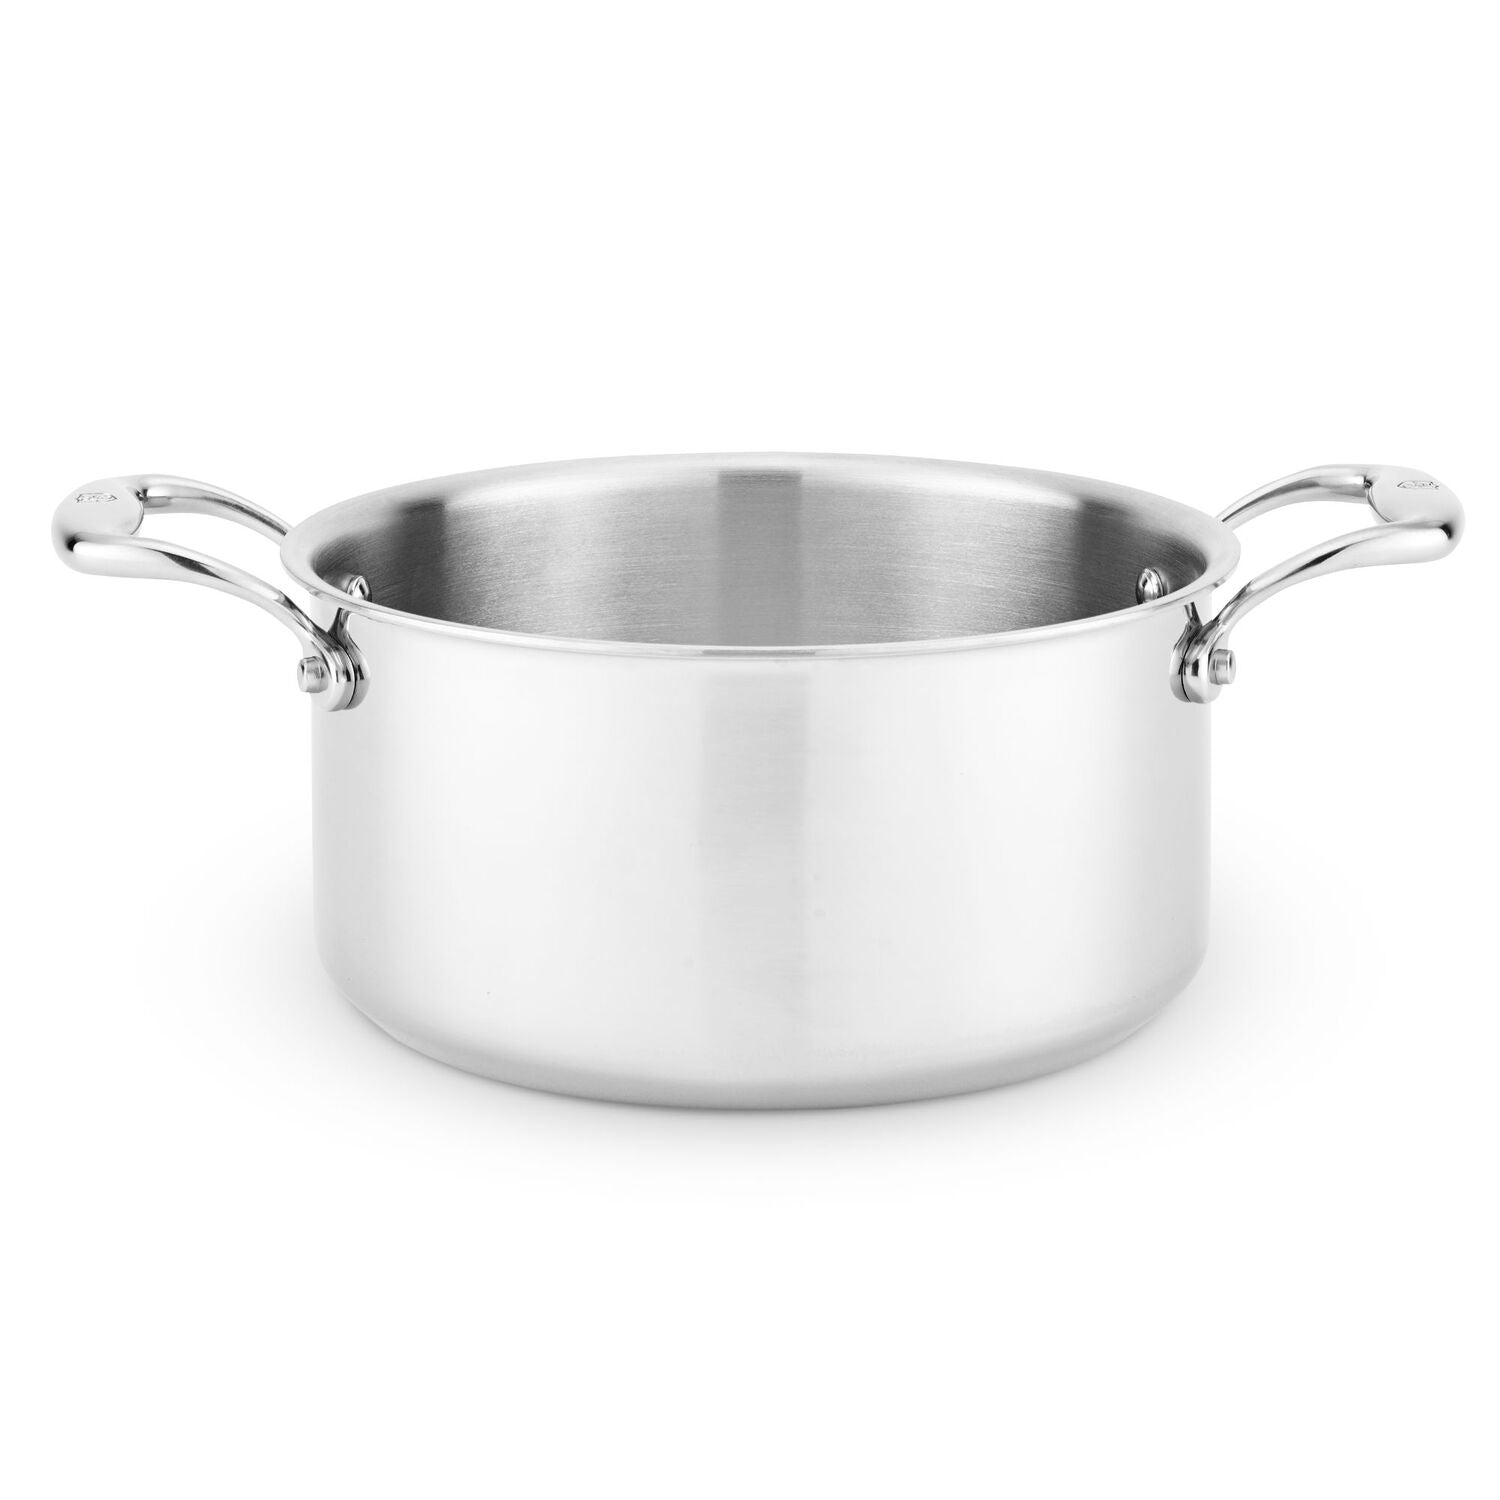 Ryori Stainless Steel Saucepan - 4 Quart, Tri-Ply, Aluminum Core, Oven  Safe, Professional Grade Non-Stick Cooking Pot with Lid - Polished  Stainless